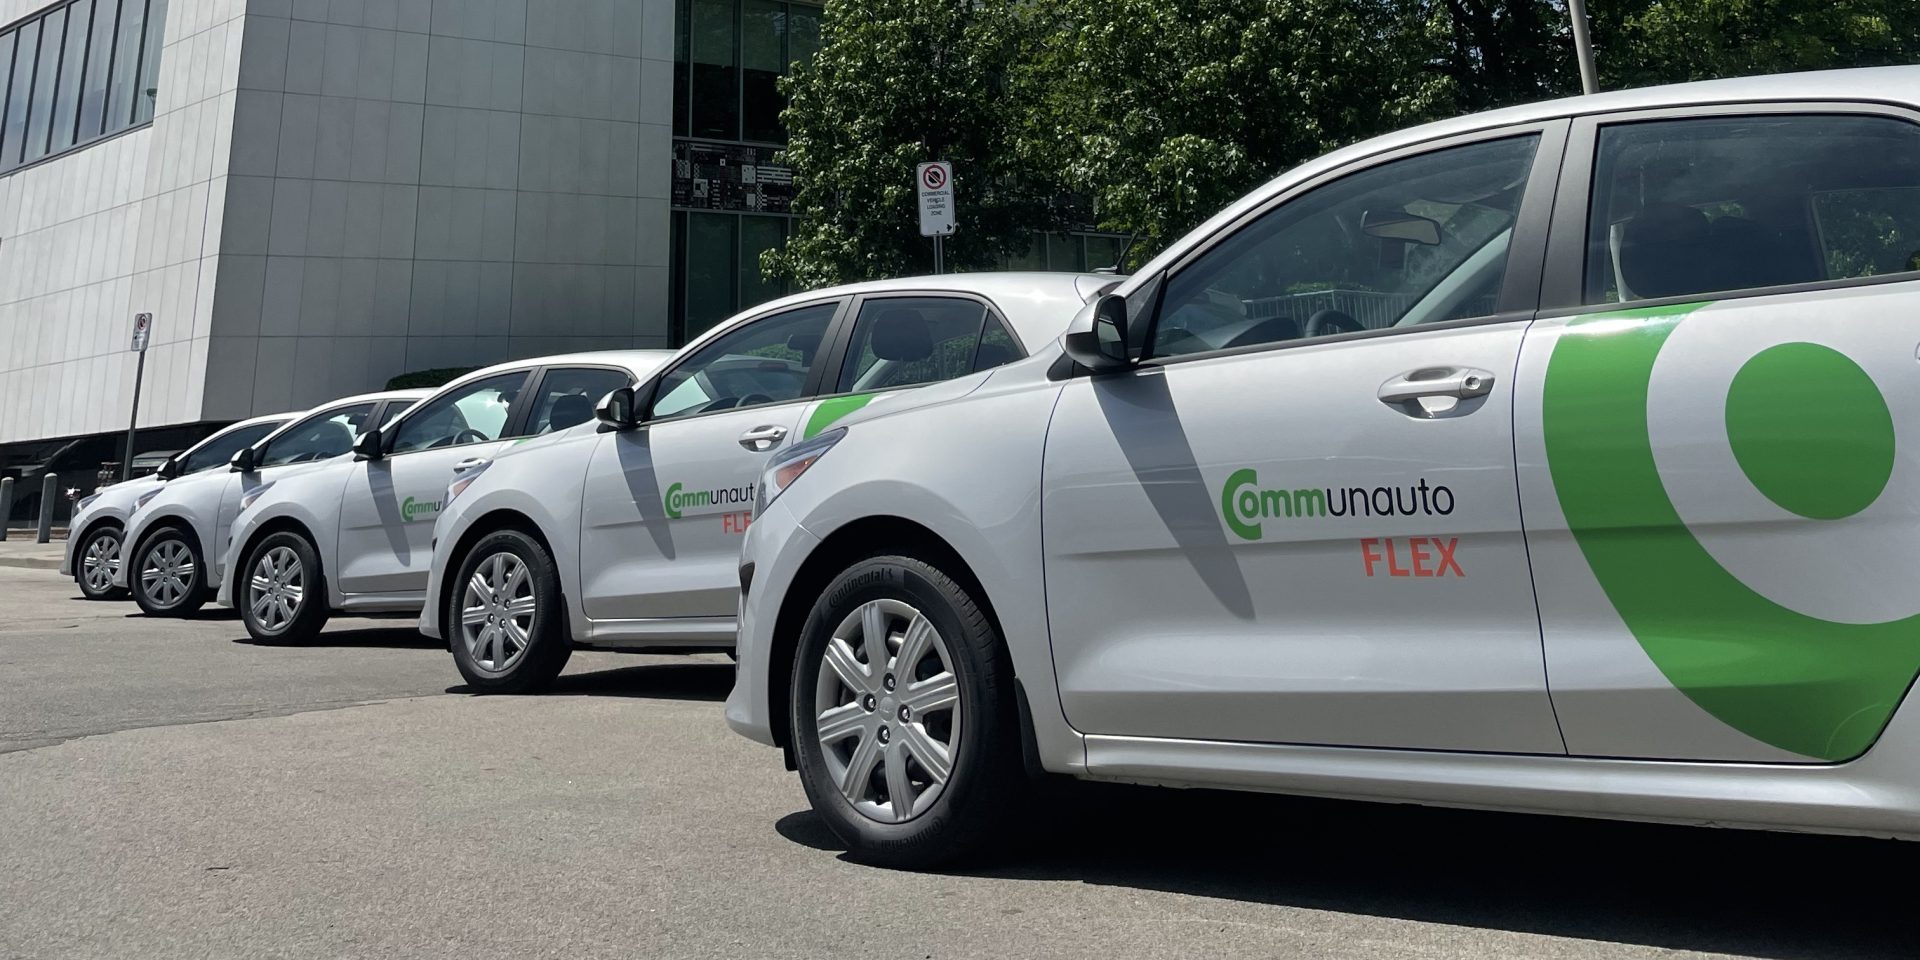 New Flex car-share service launches in Hamilton. Here's how it works